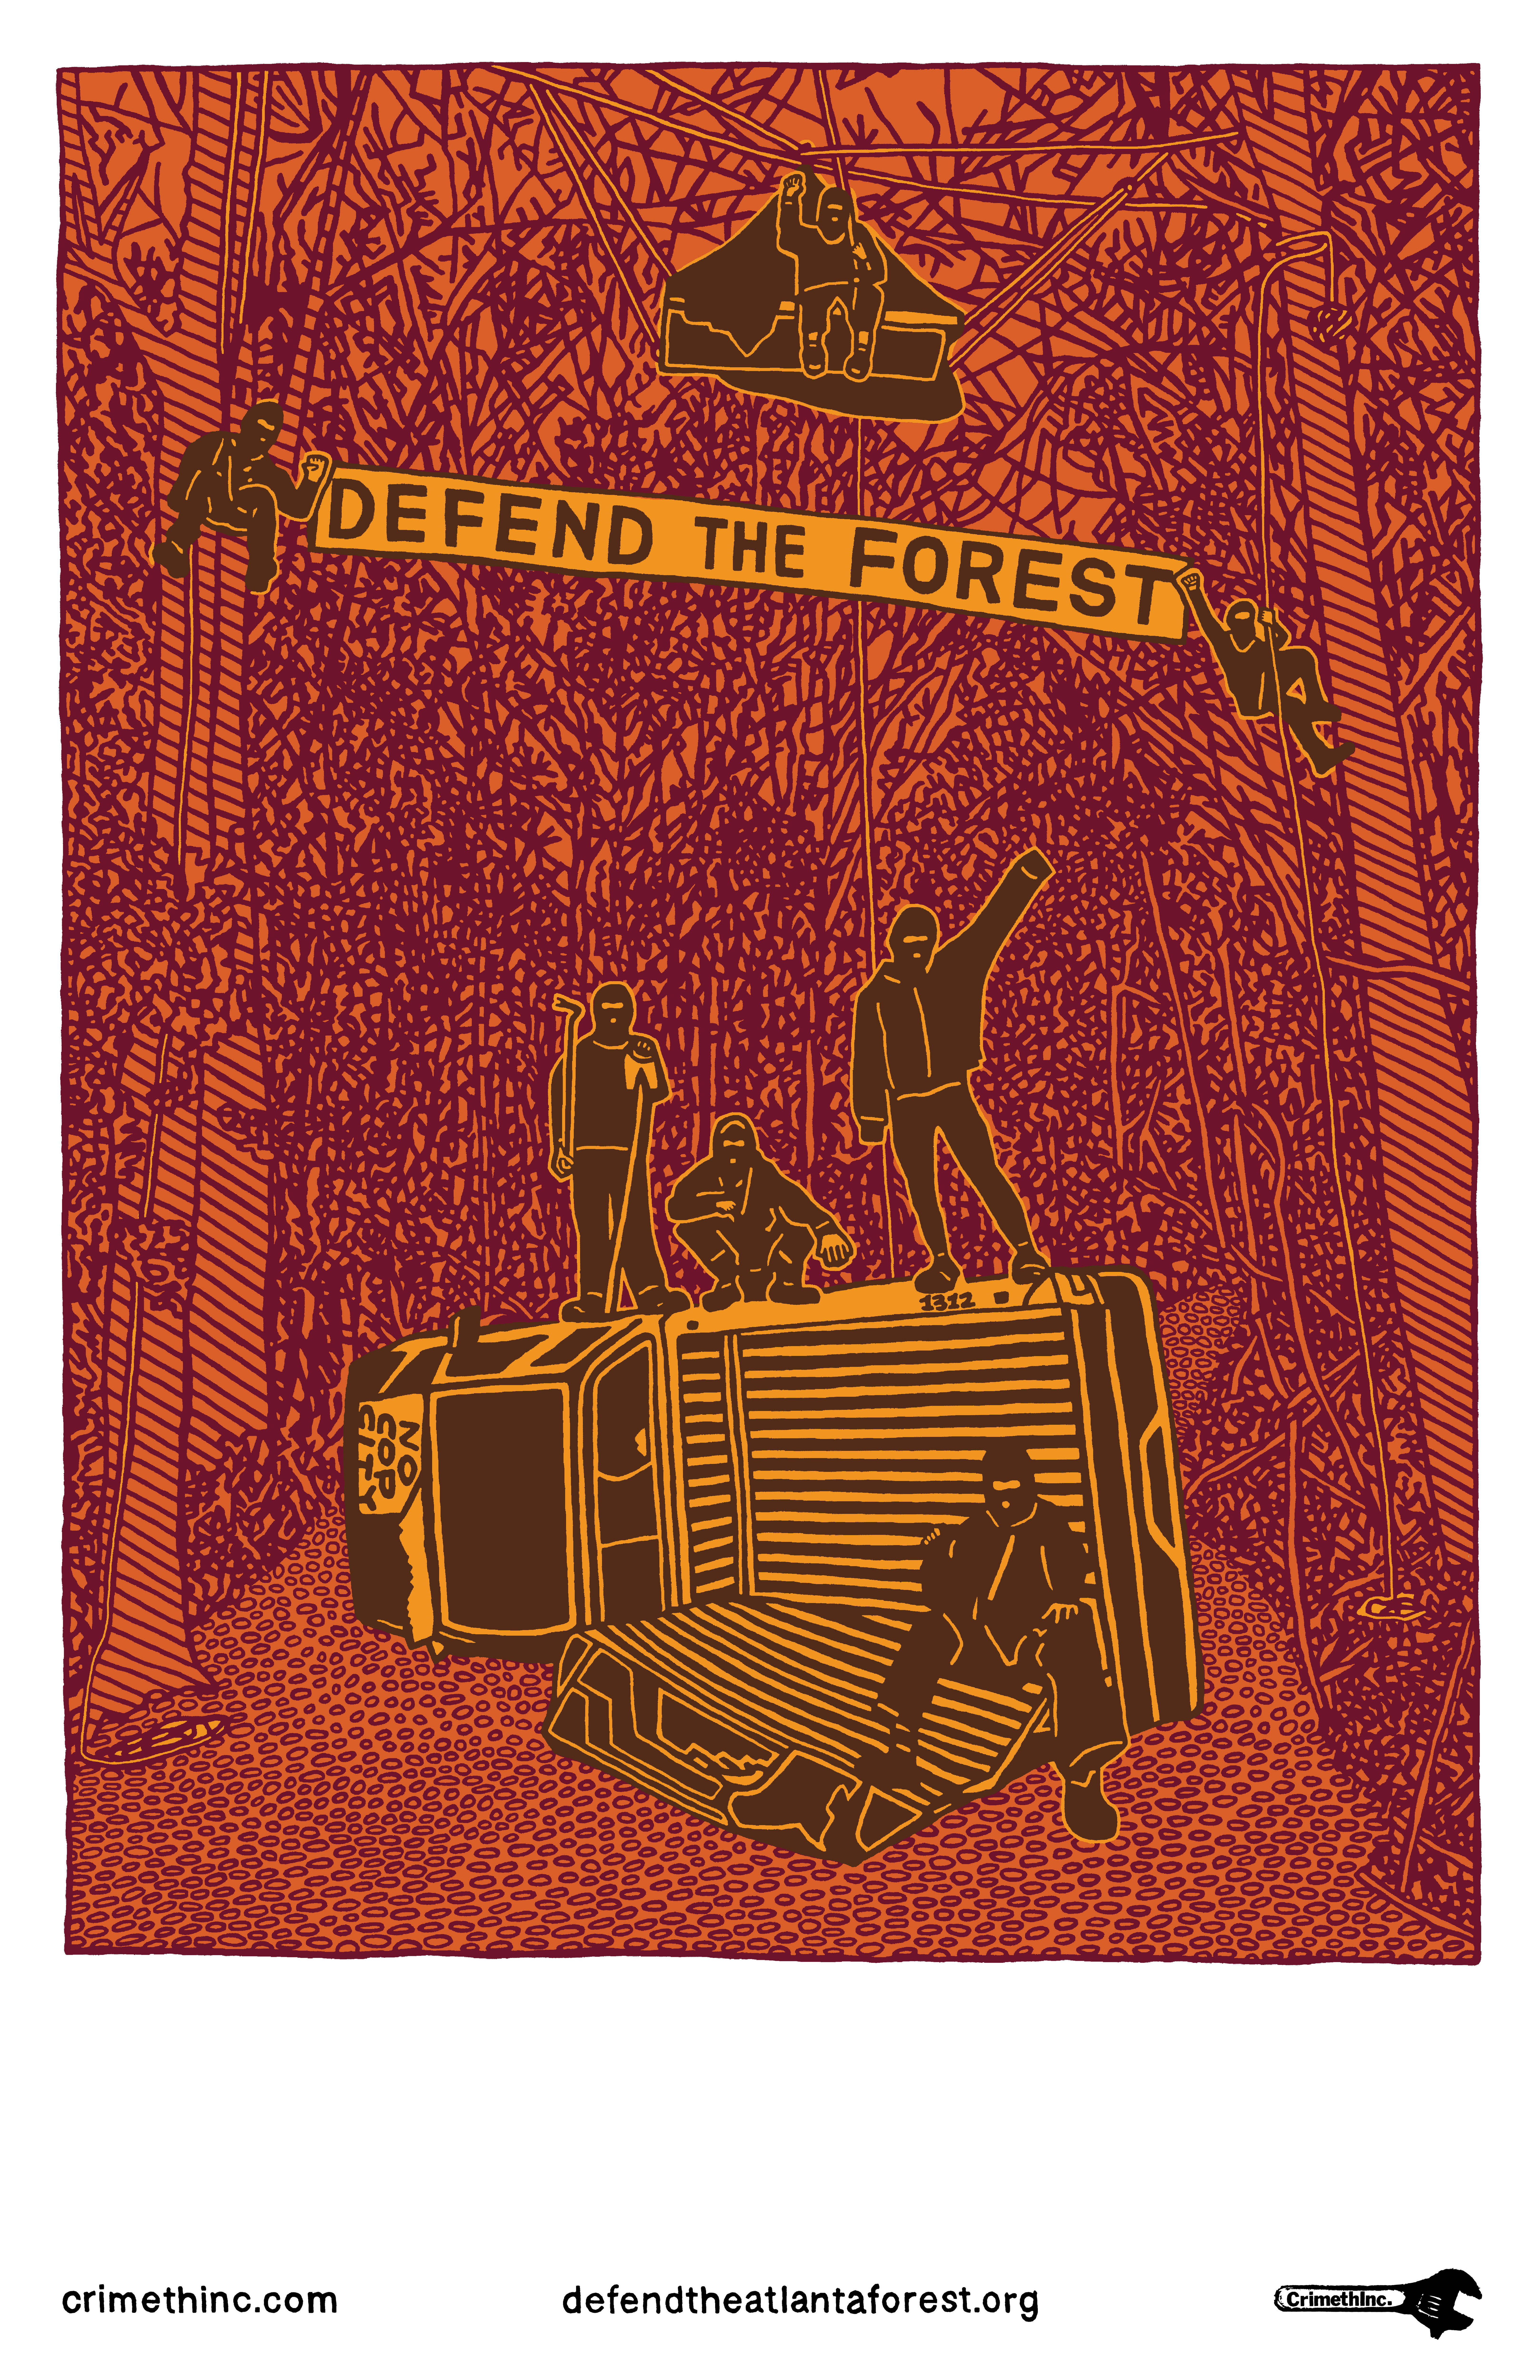 Photo of ‘Defend the Forest’ front side